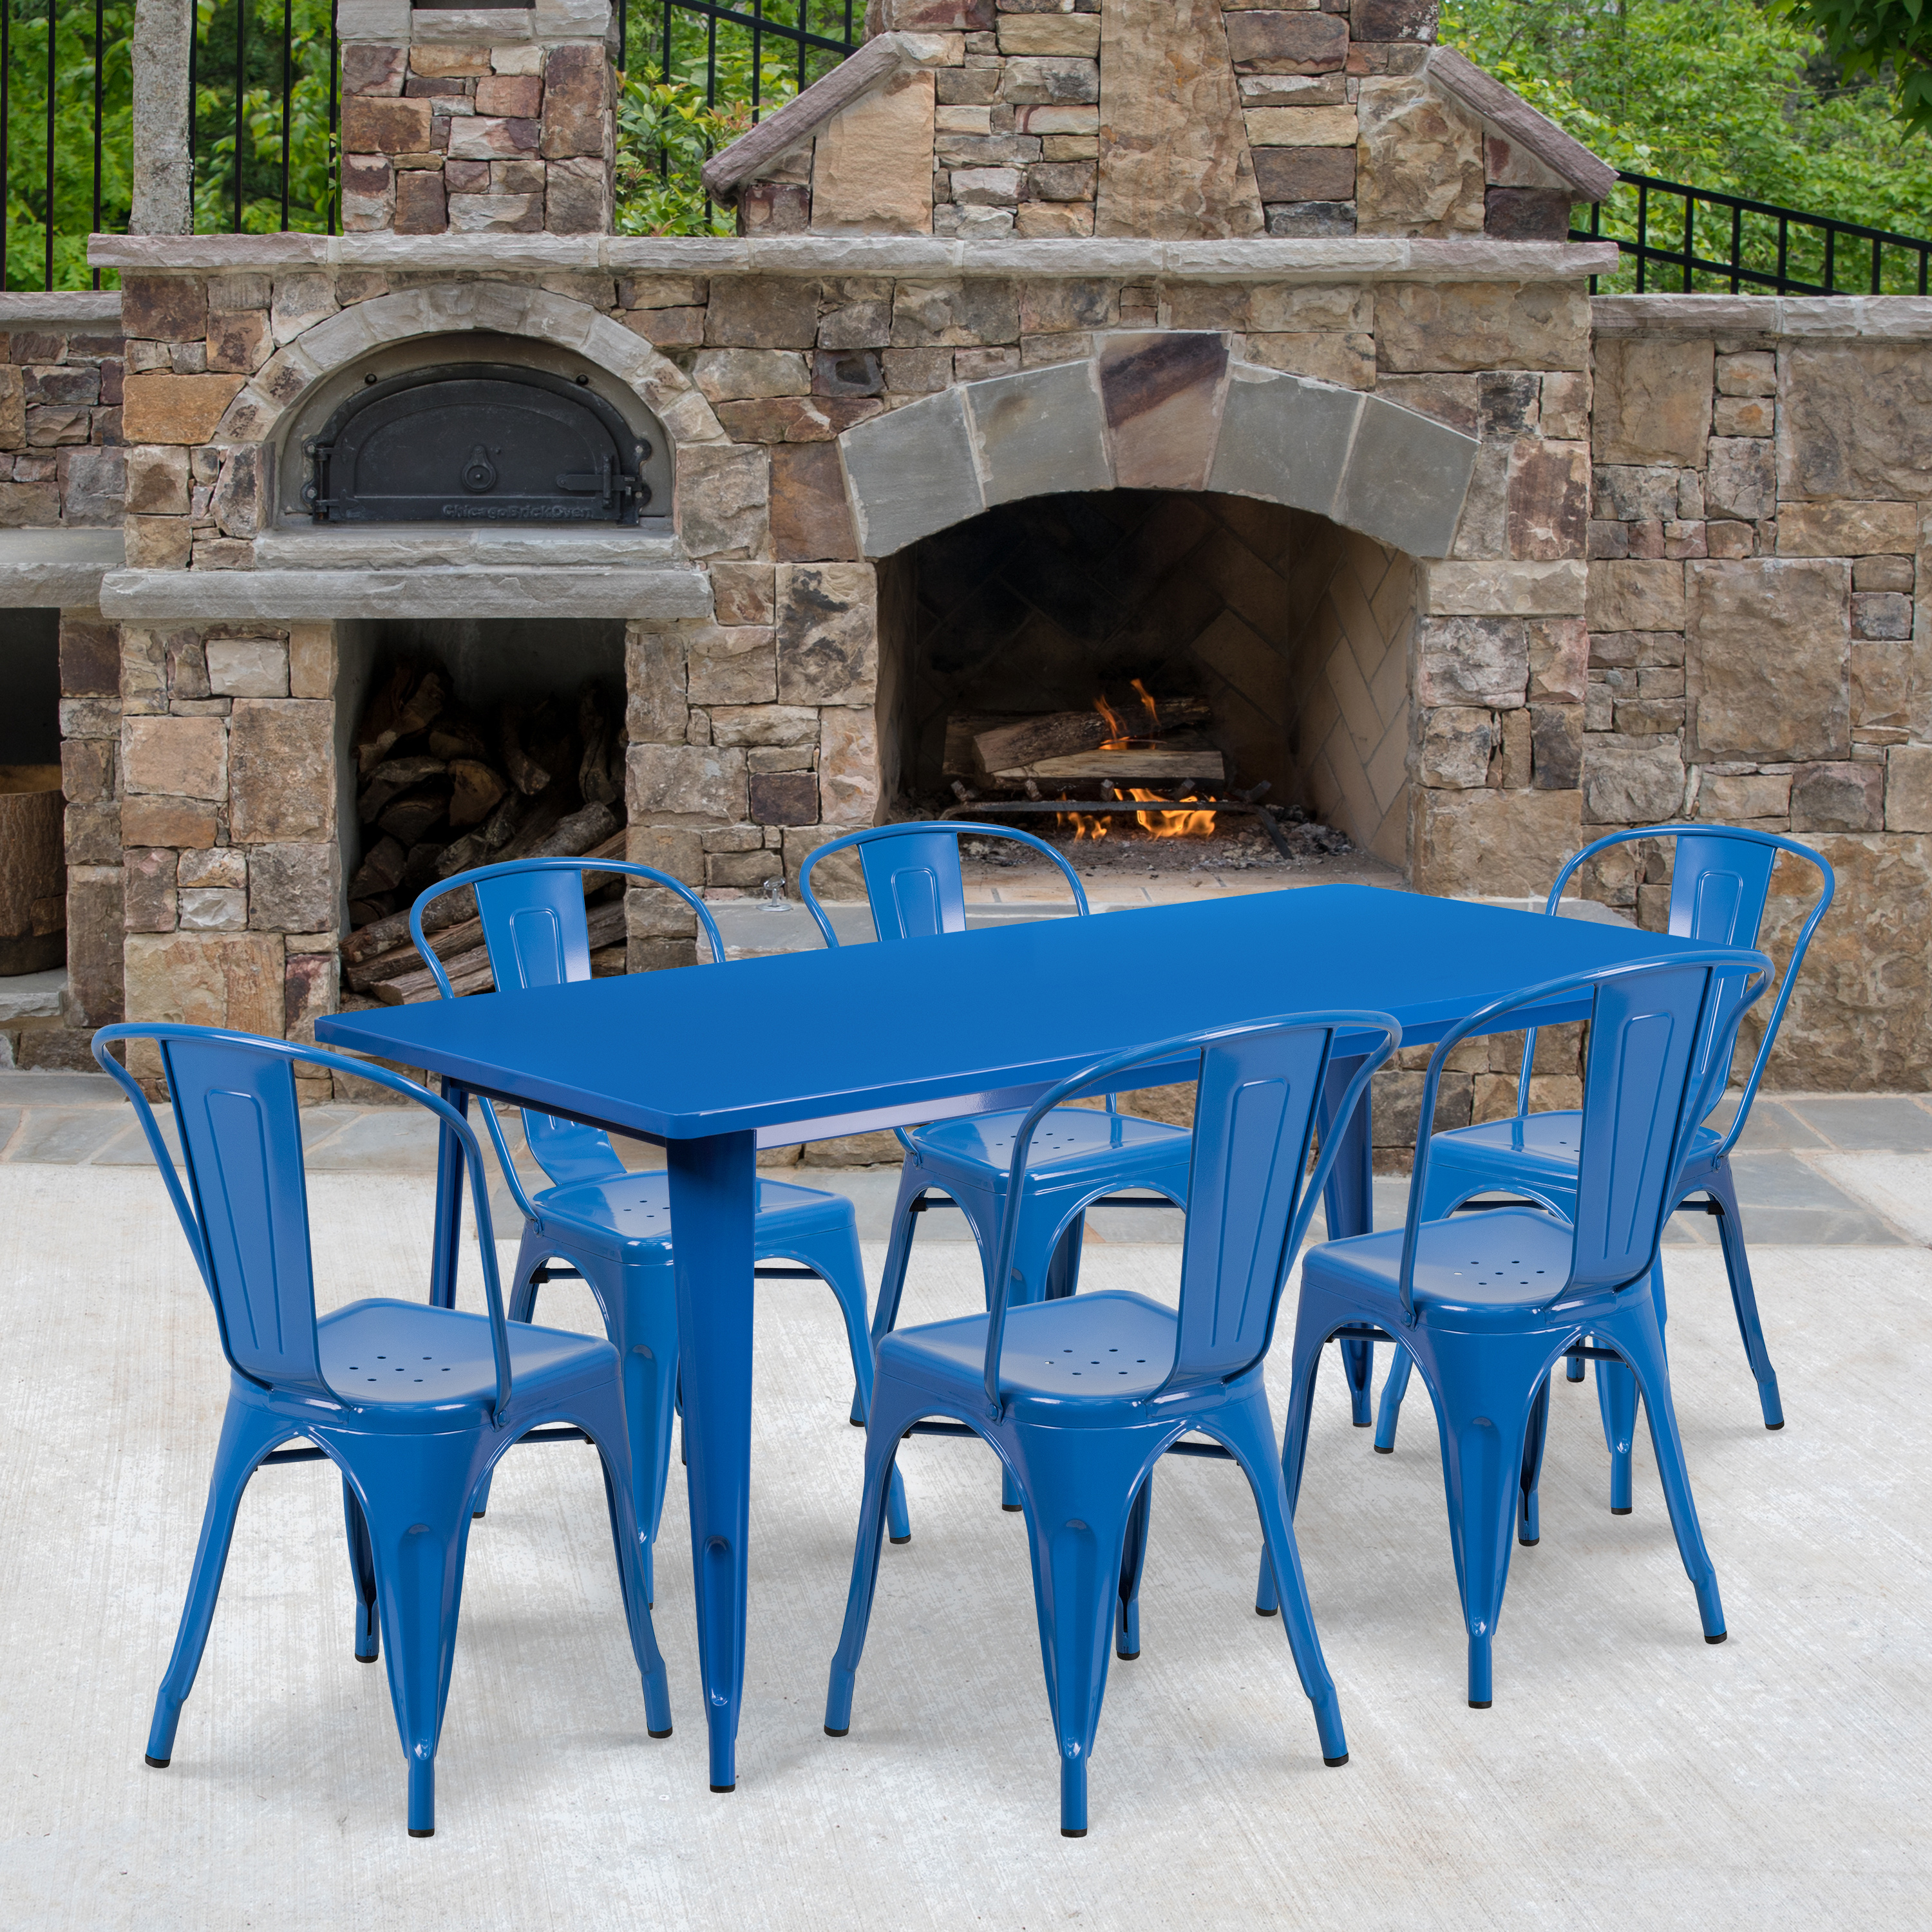 Flash Furniture Gilbert Commercial Grade 31.5" x 63" Rectangular Blue Metal Indoor-Outdoor Table Set with 6 Stack Chairs - image 2 of 5